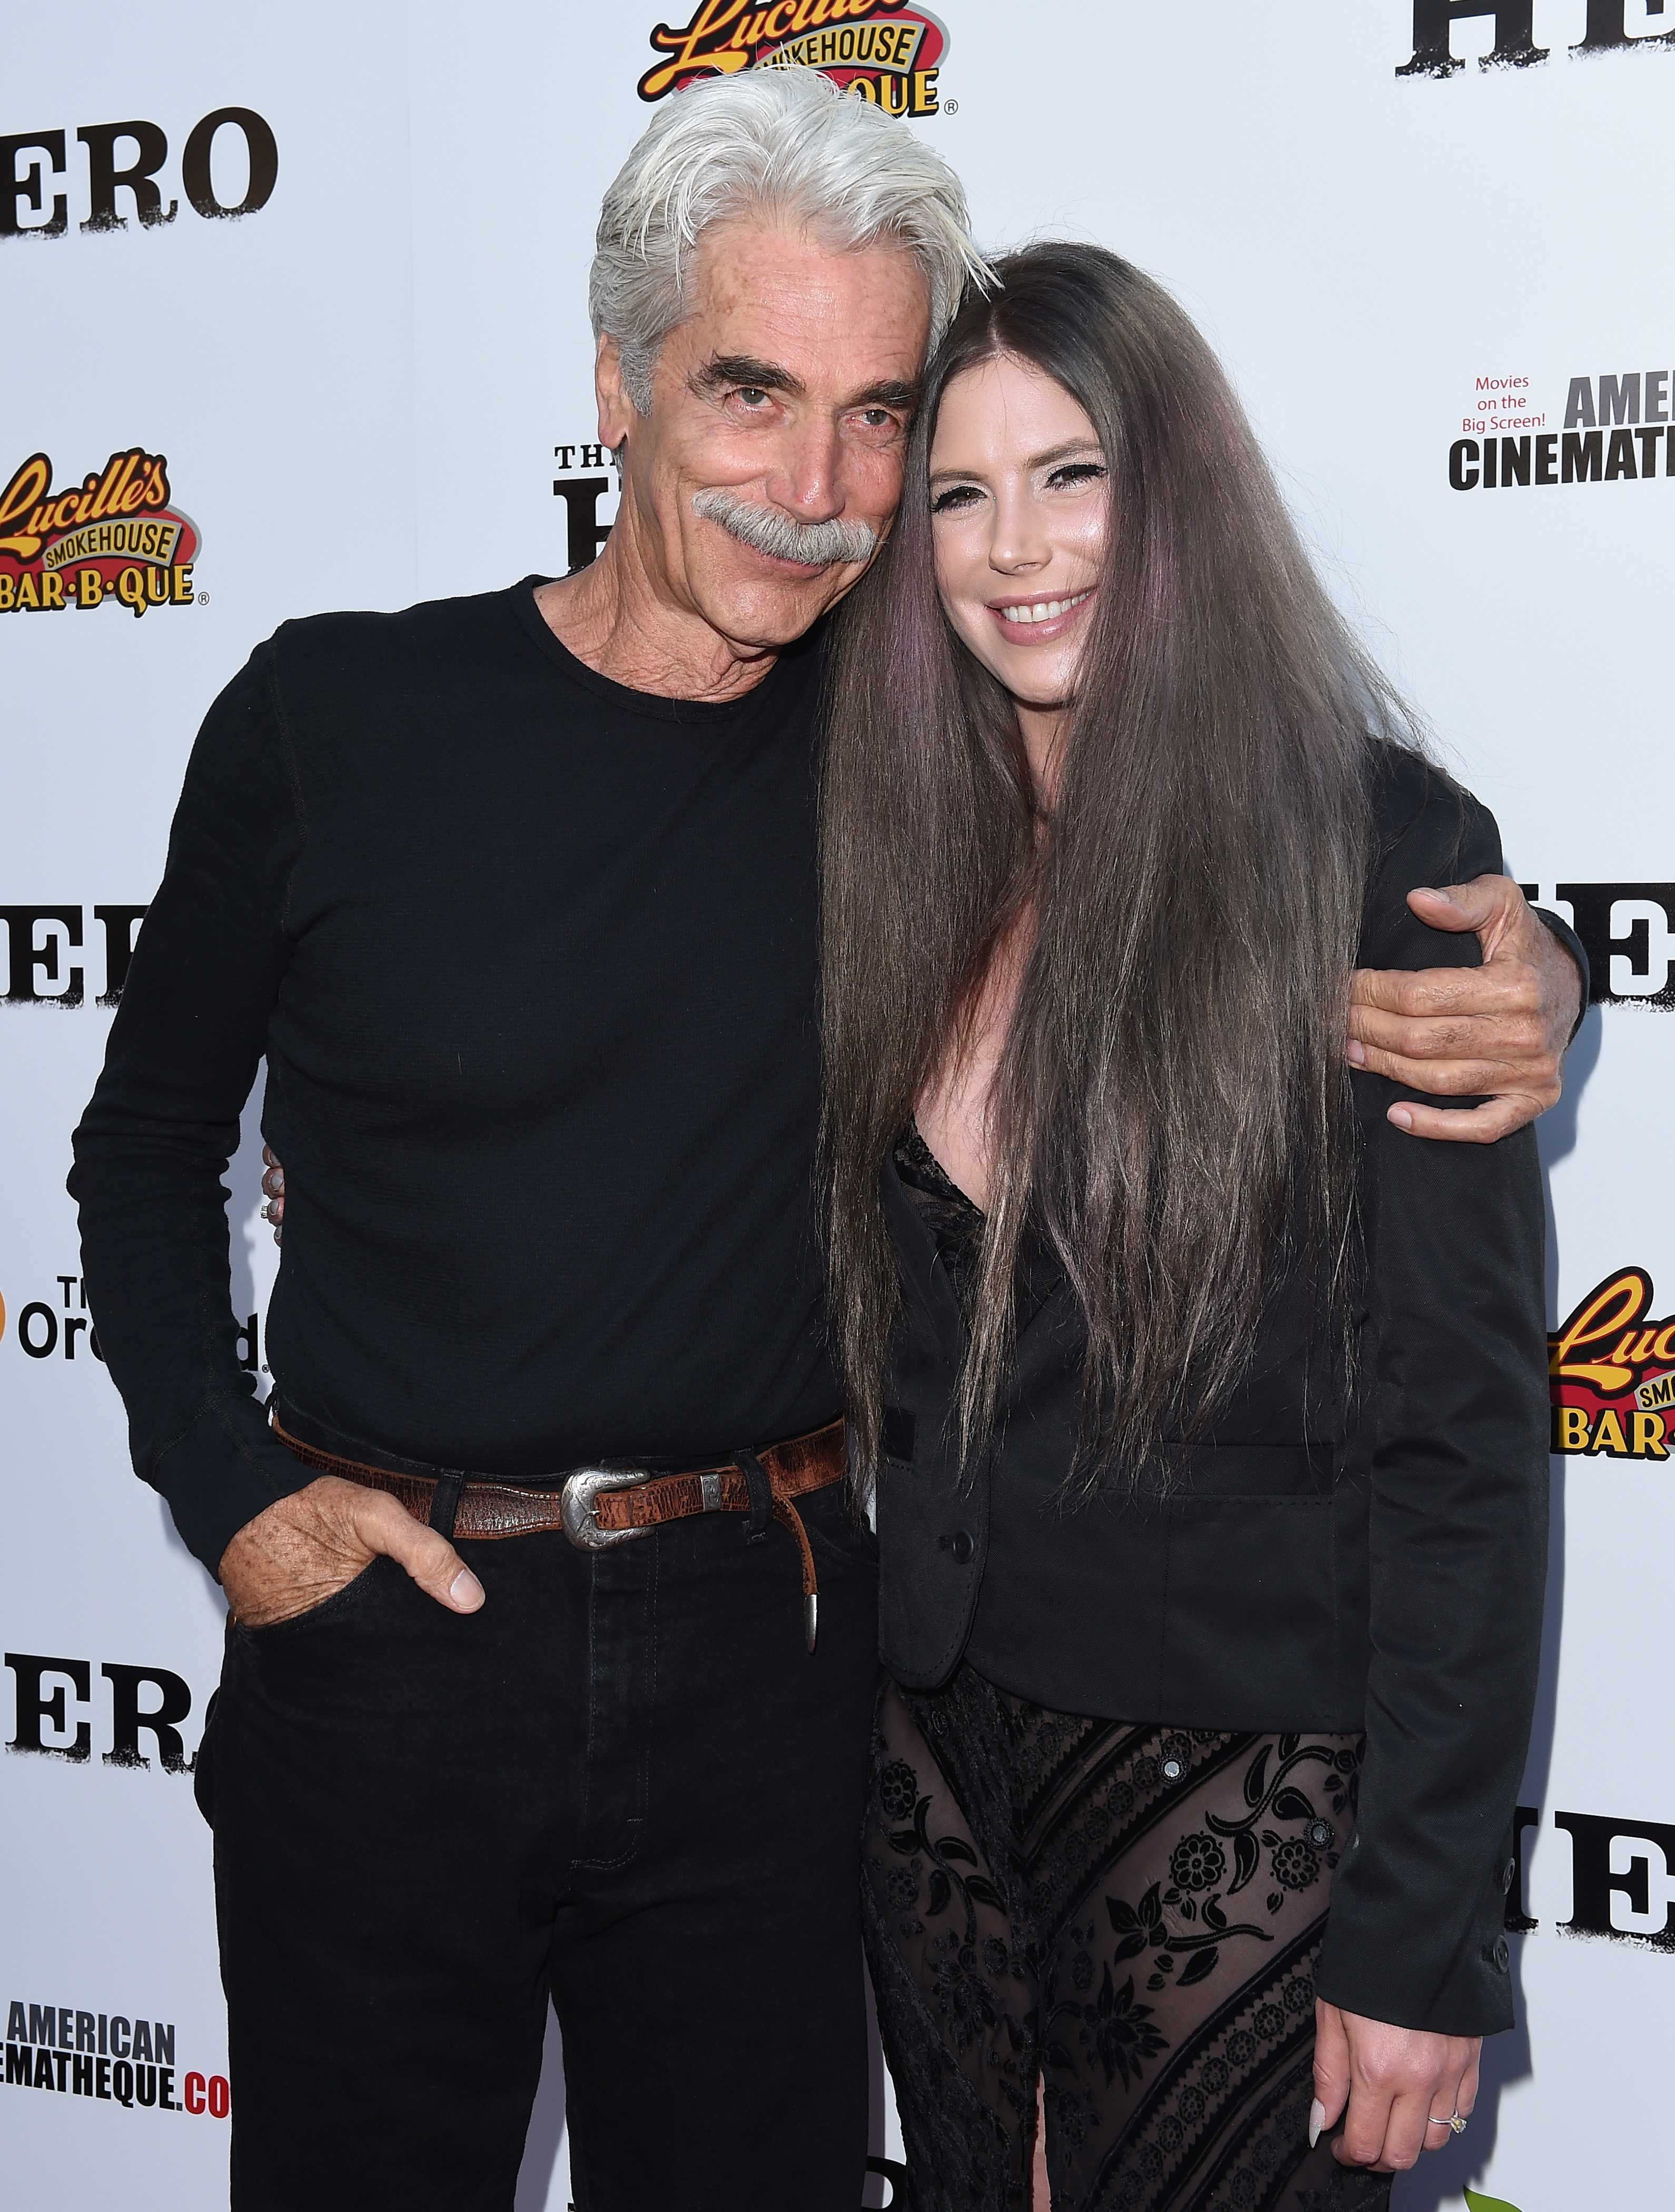 Sam Elliott and his daughter, Cleo Rose Elliott, at the Los Angeles premiere of "The Hero" on June 5, 2017, in Hollywood, California | Source: Getty Images